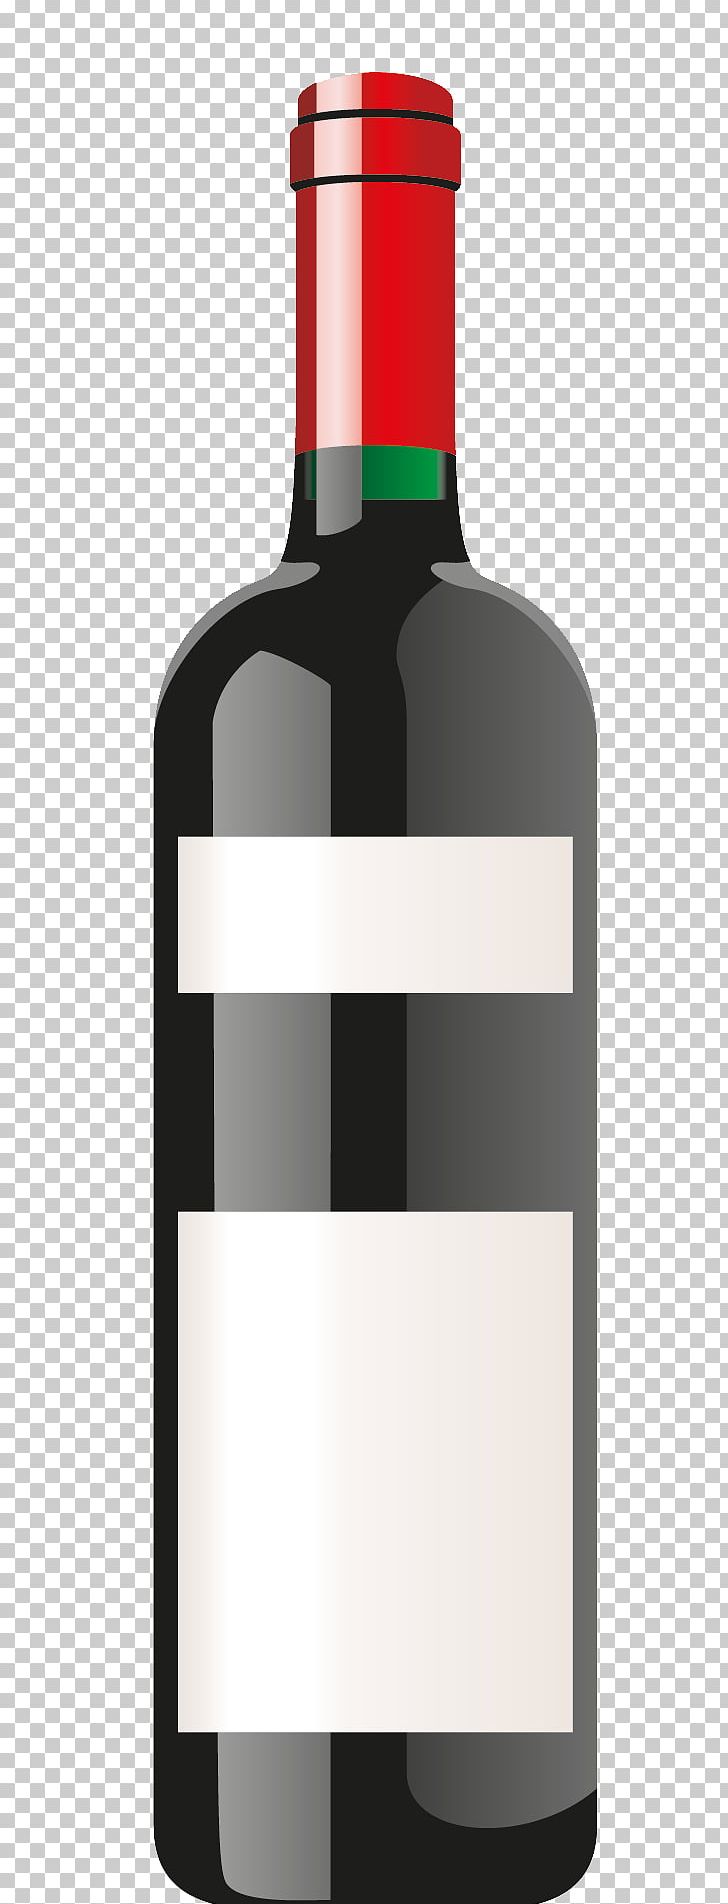 Red Wine Bottle The Wild Vine Wine Glass PNG, Clipart, Alcoholic Drink, Bottle, Bottles, Common Grape Vine, Drink Free PNG Download